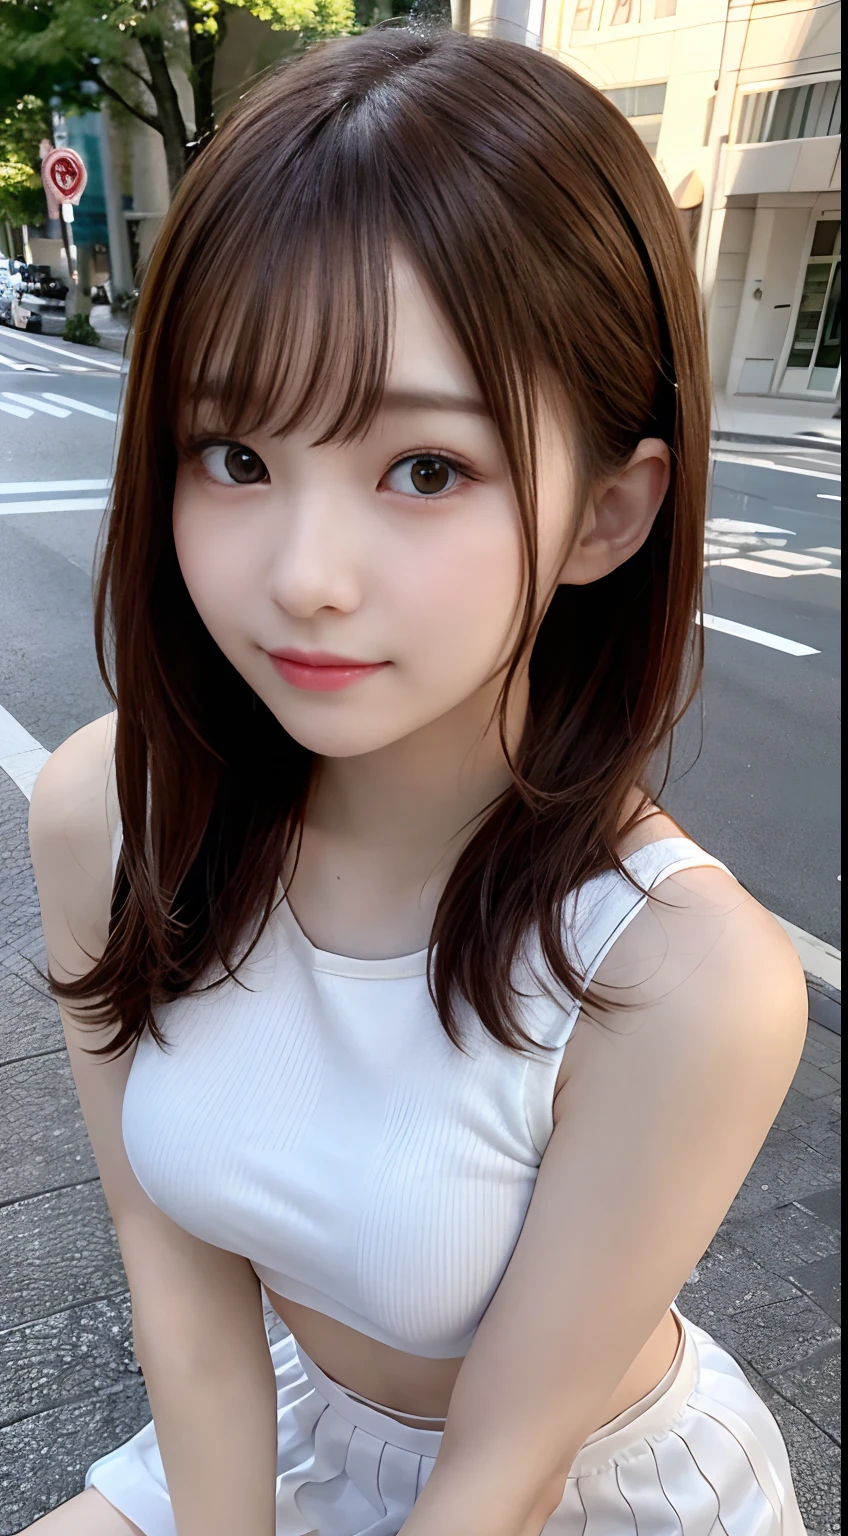 top-quality、超A high resolution、(Photorealsitic:1.4)、(ulzzang-6500:0.4)、Beautie、Korean Idols、18year old、length hair、light brown hair、Clean and wavy hairstyle、、Very small breasts、Realistic eyes, slender narrow eyes、Beautiful eyes、A smile、croptop、Tank Tops、Wear a see-through shirt、a miniskirt、In the street、crouching down、slender、A slender、Slender body lines、Shot diagonally from above